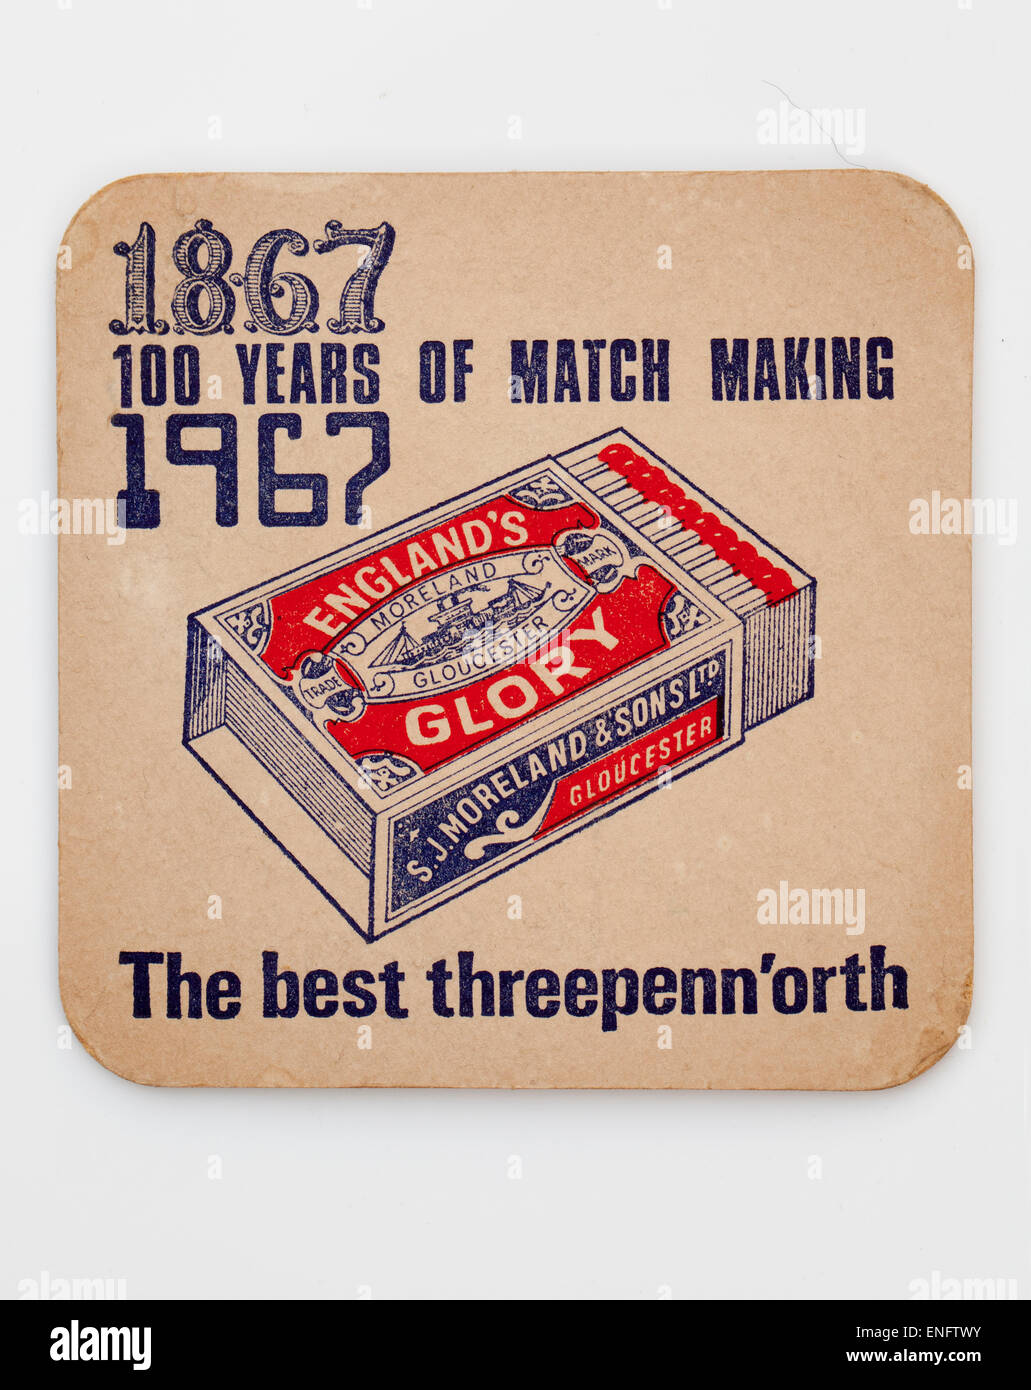 Old or Vintage Beer Mat advertising Englands Glory Matches Stock Photo